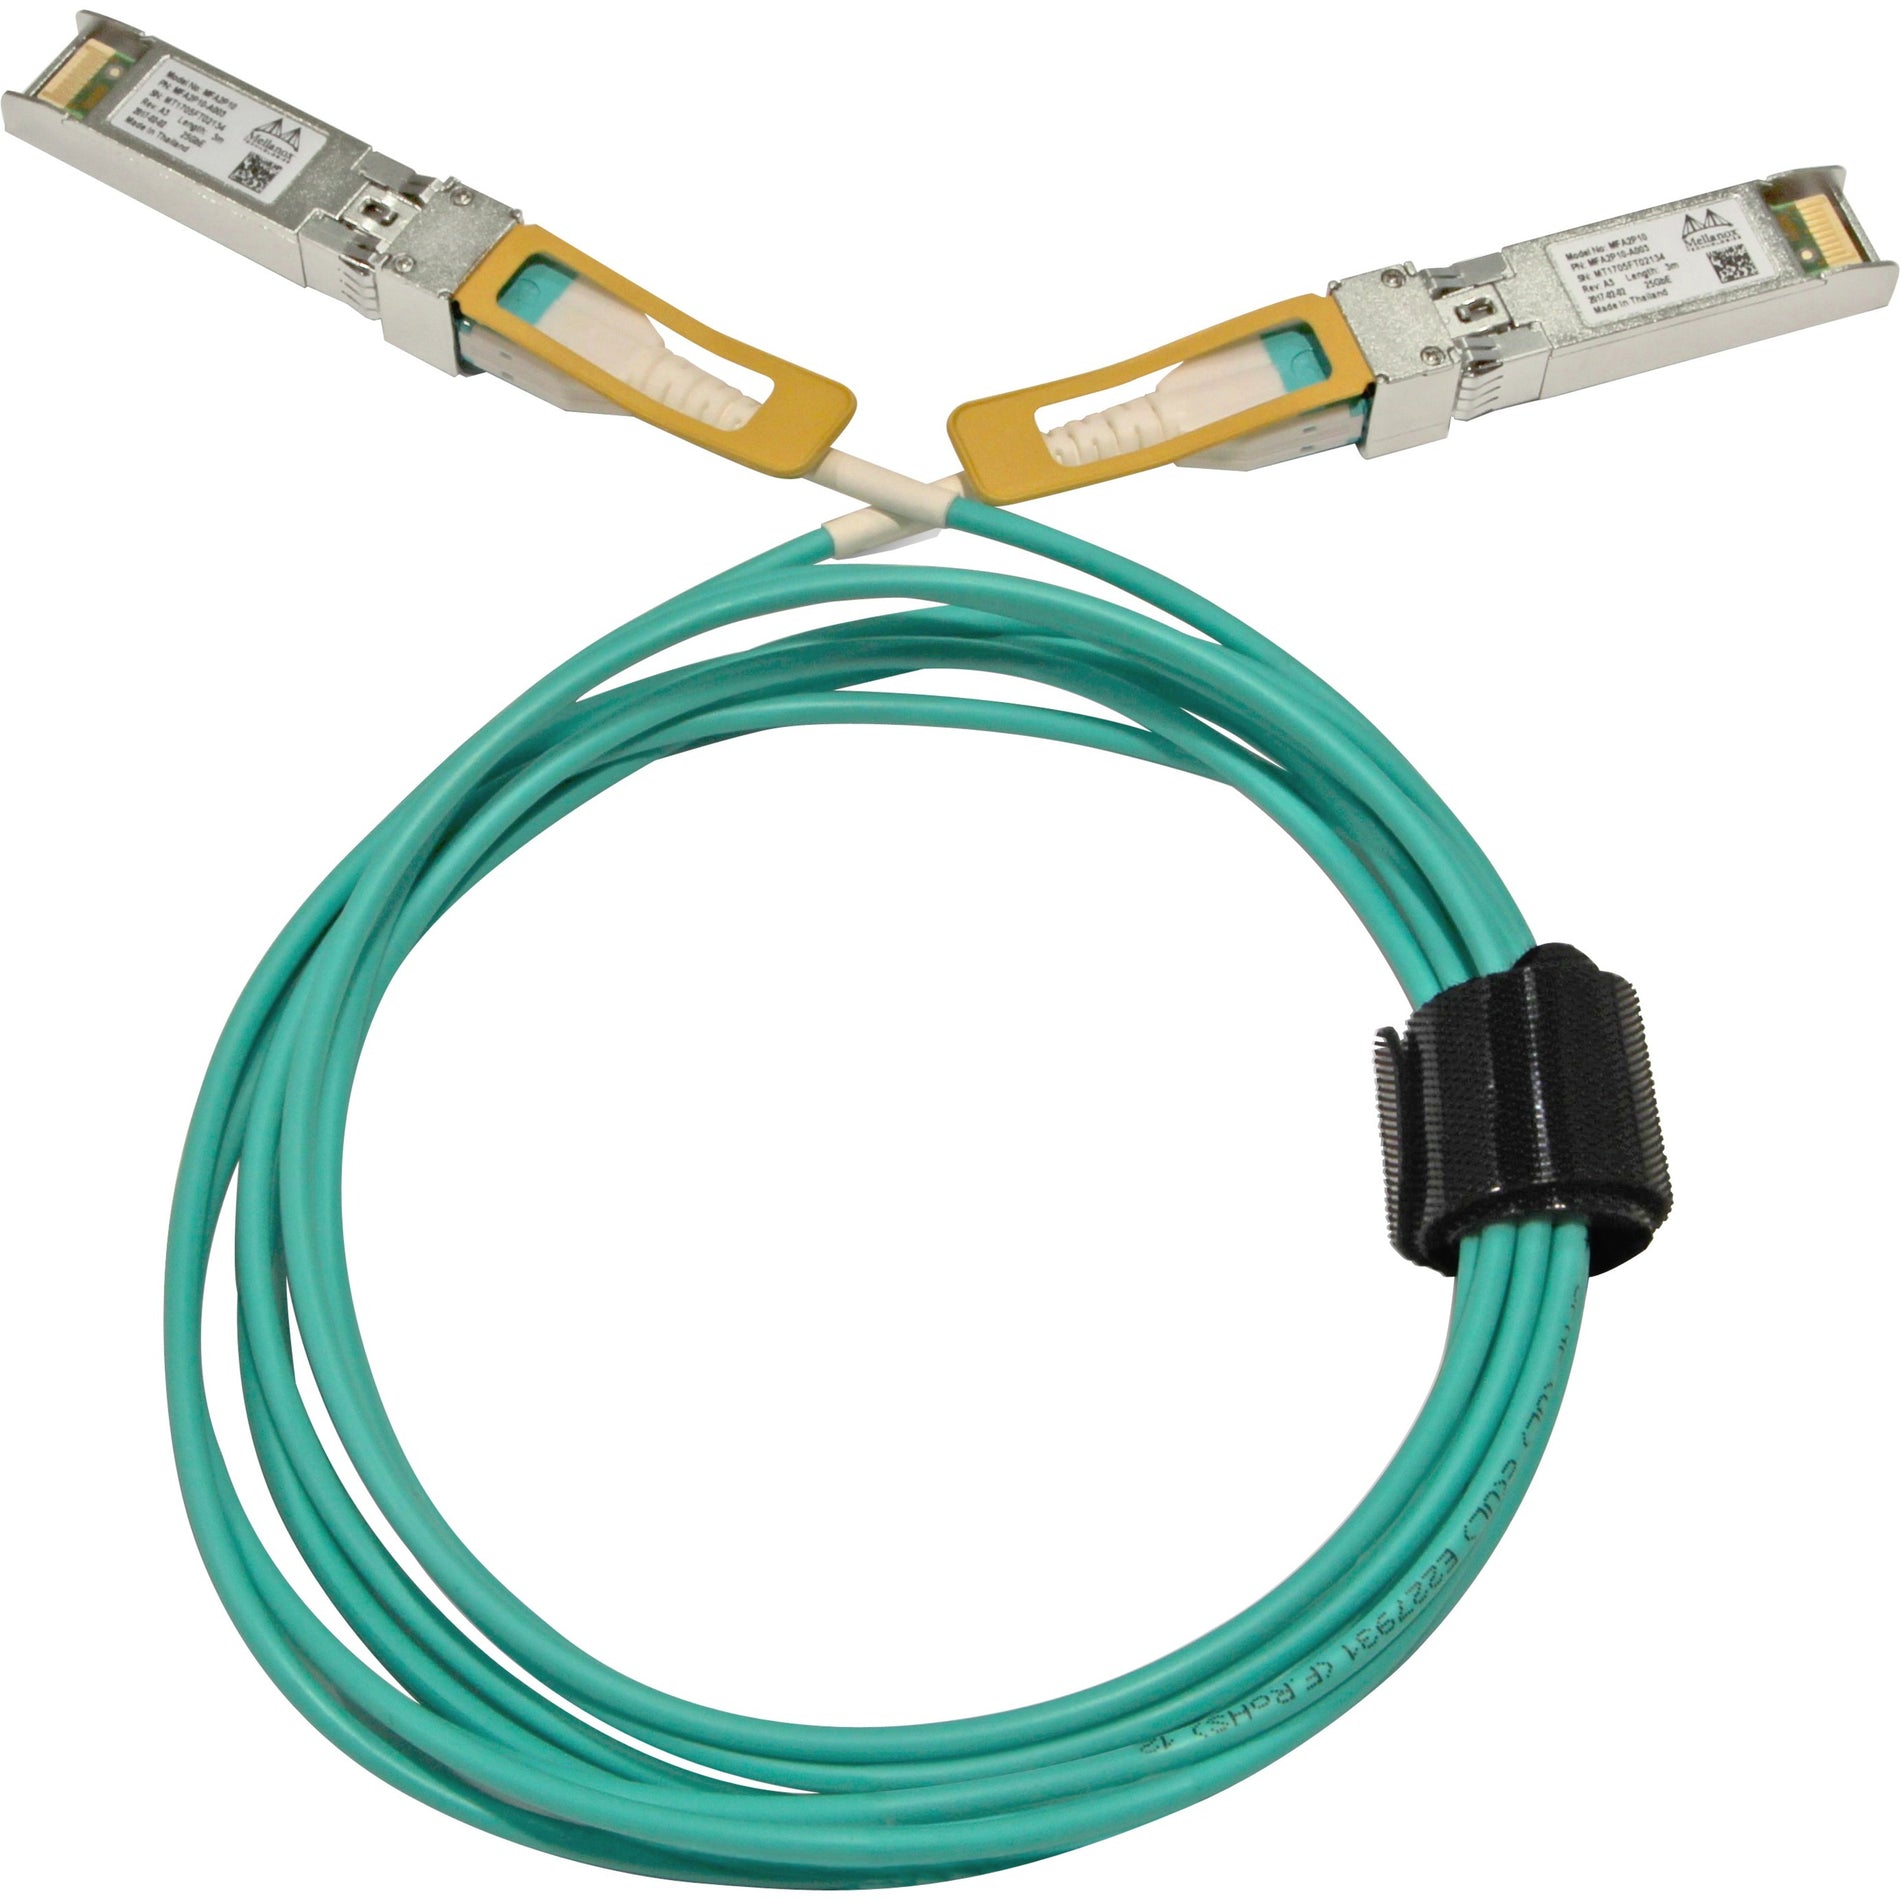 Accortec MFA2P10-A003-ACC Active Optical Cable 25GbE, SFP28, 3m - High-Speed Fiber Optic Network Cable